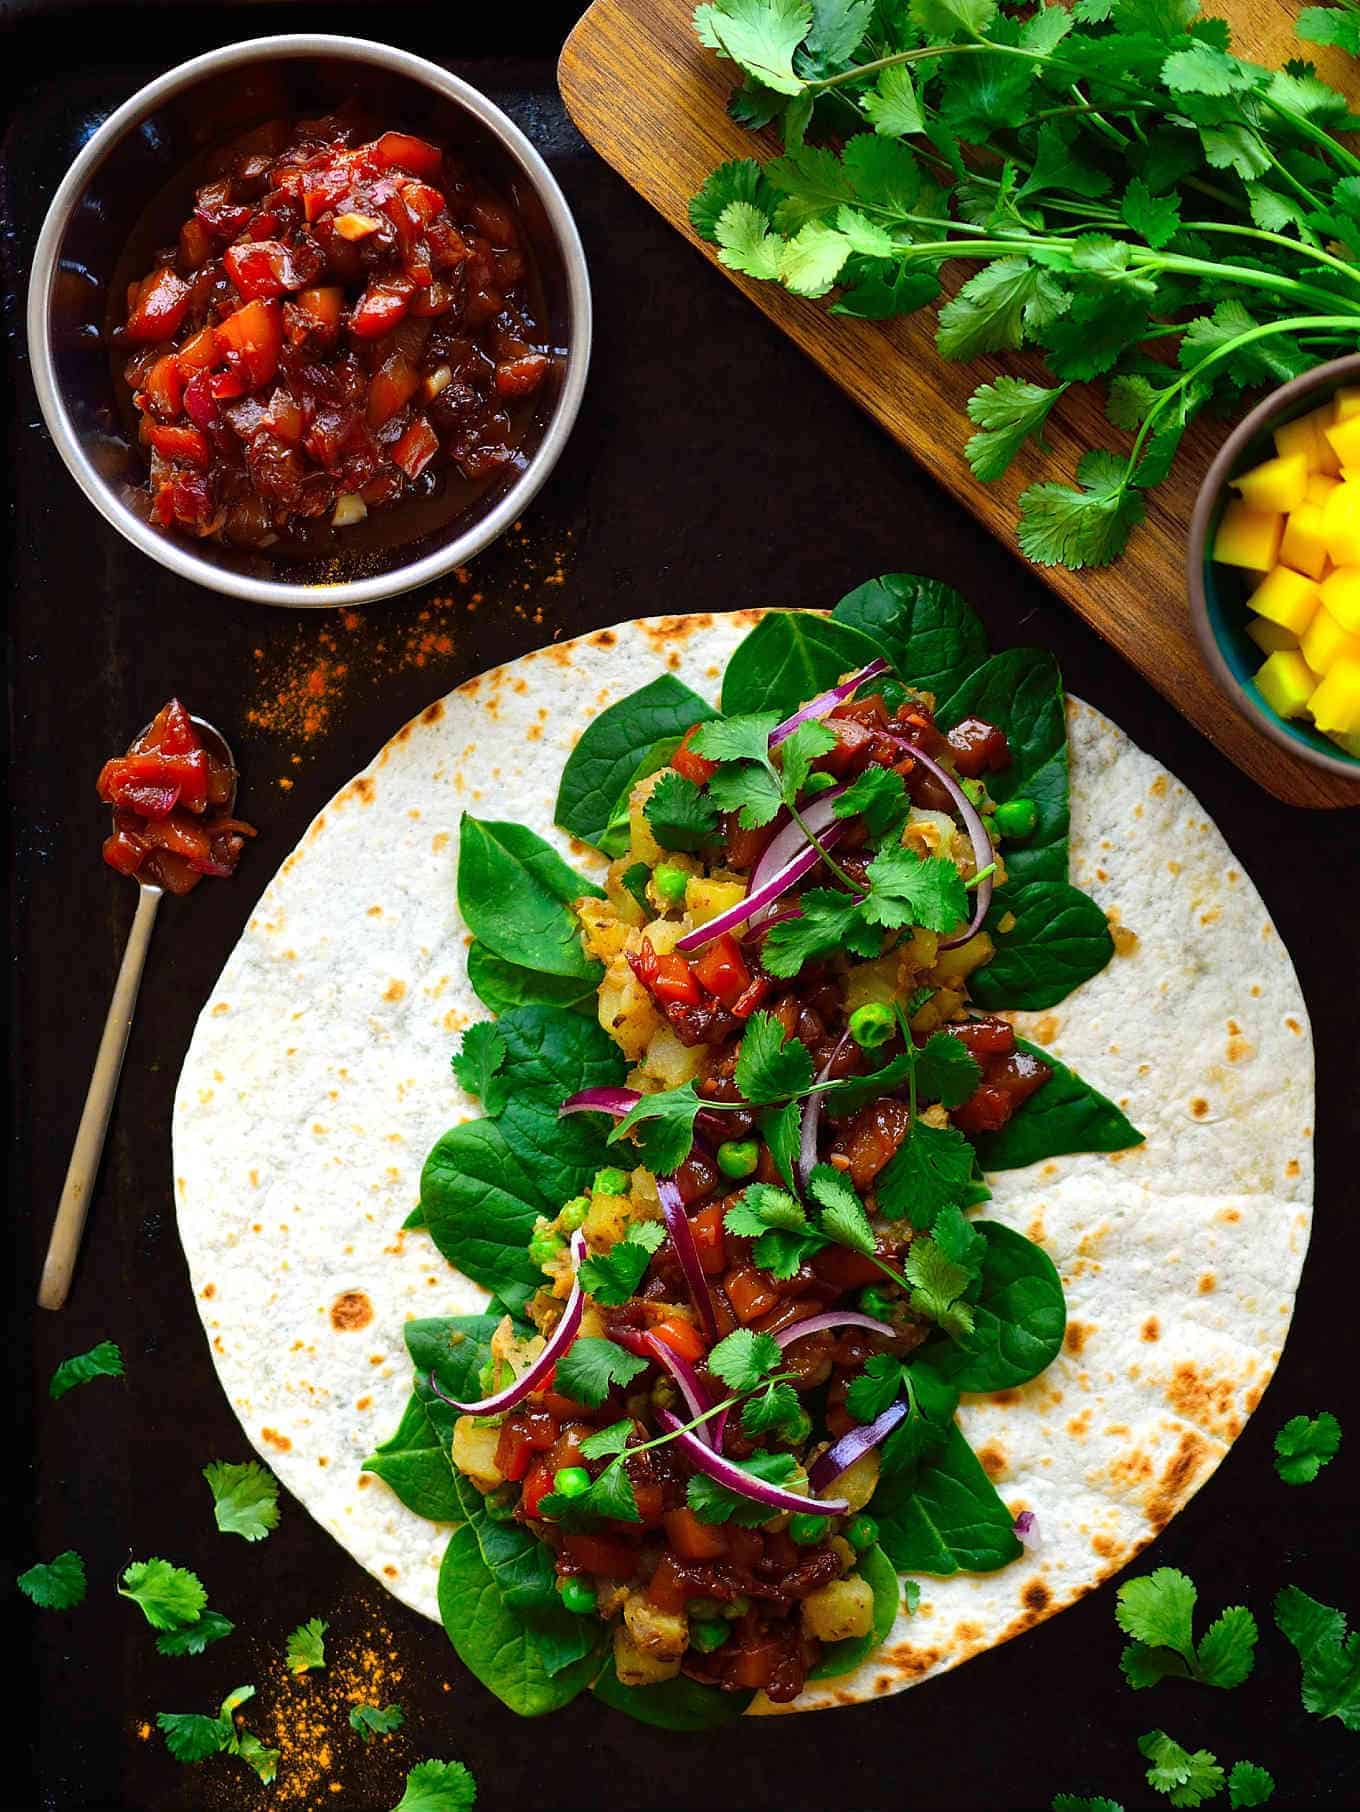 These samosa wraps are super easy to put together with spiced potatoes and peas, crisp greens, spicy red onion and a simple homemade mango chutney. Make these samosa wraps ahead and freeze them for a quick lunch (or dinner) throughout the week.